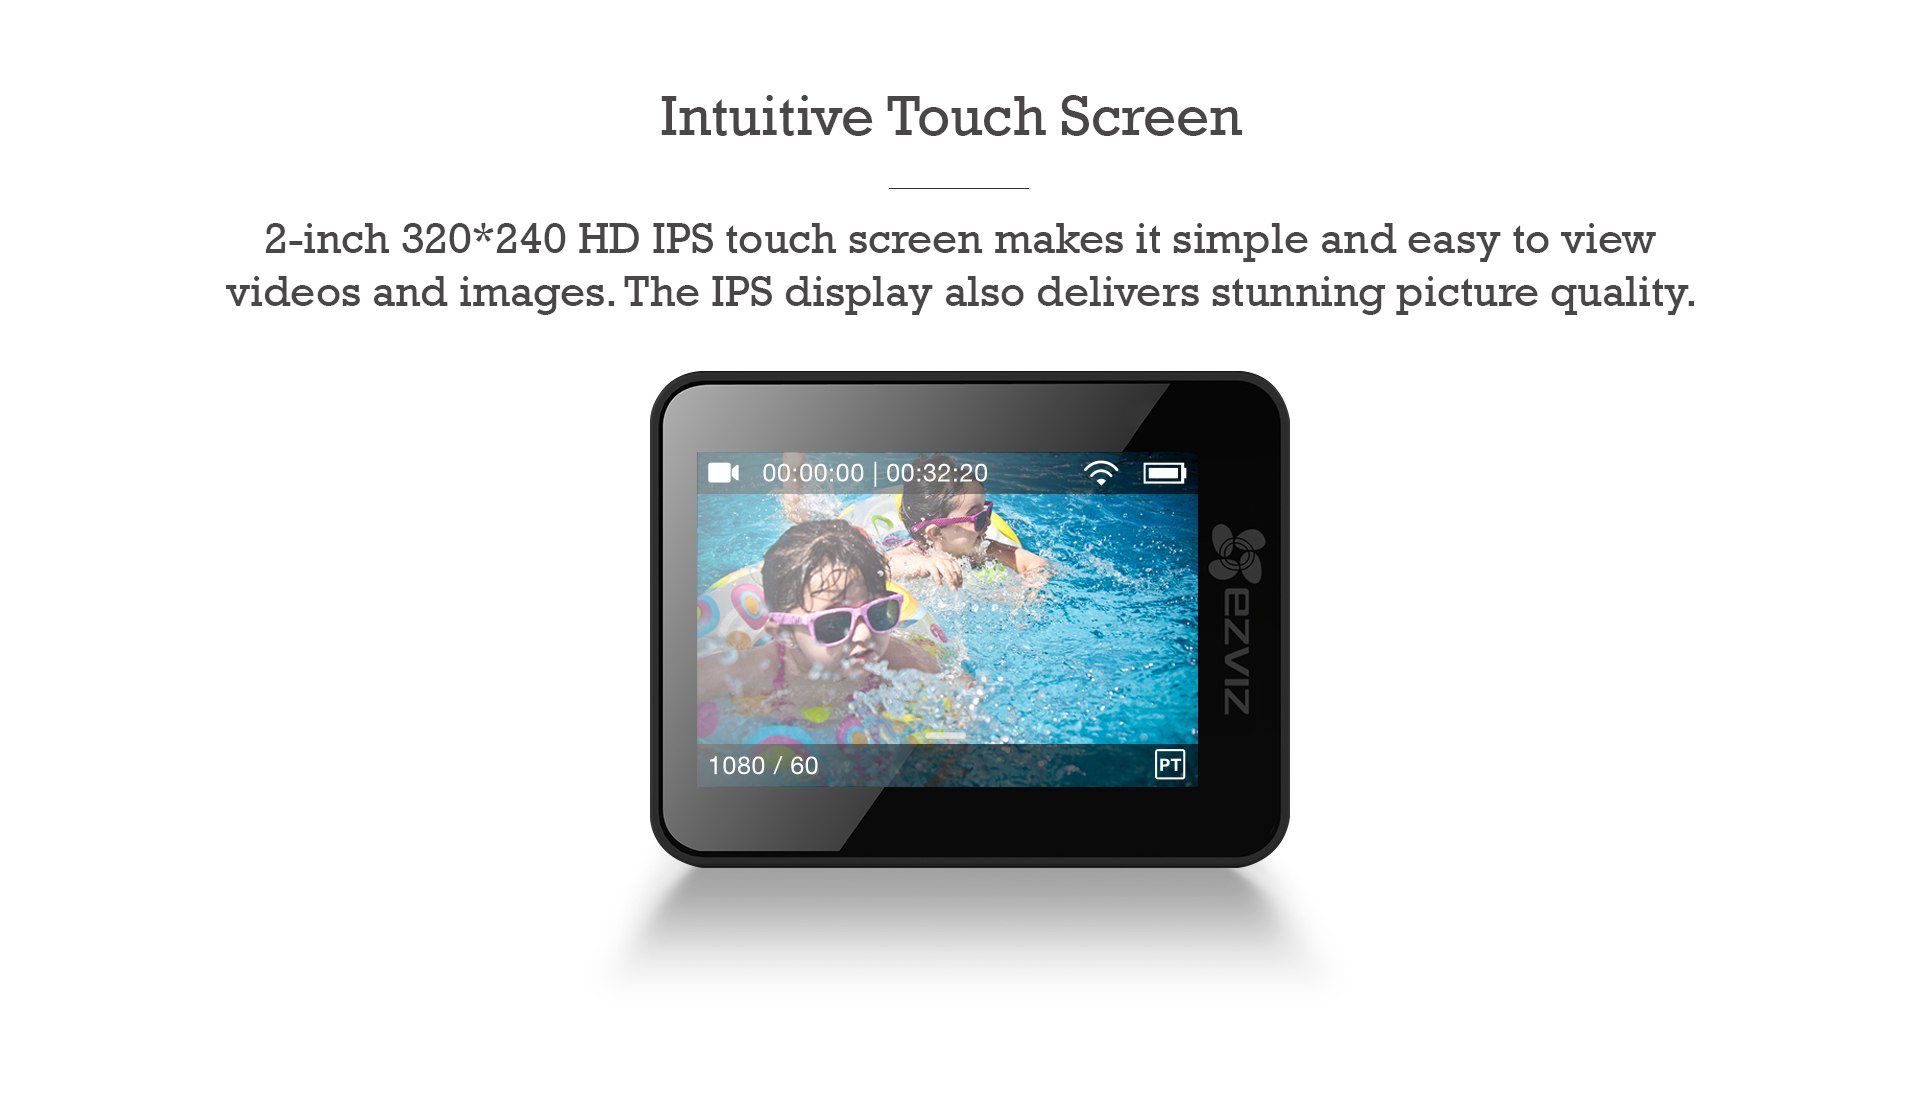 /Intuitive Touch Screen